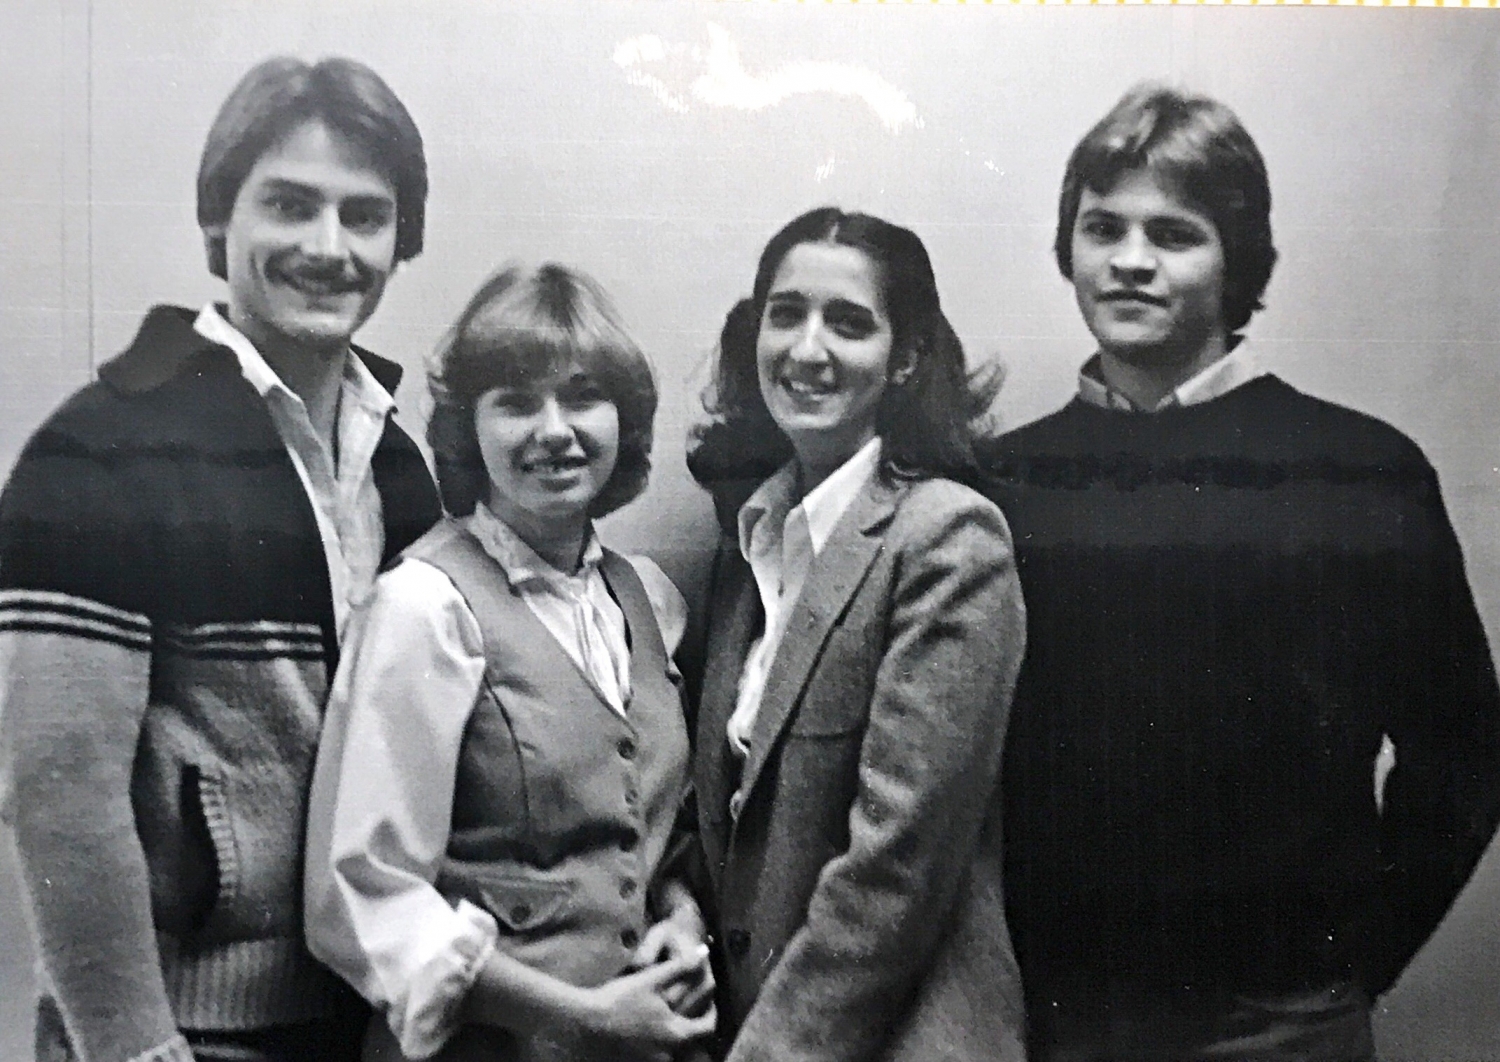 Some of our members in 1980